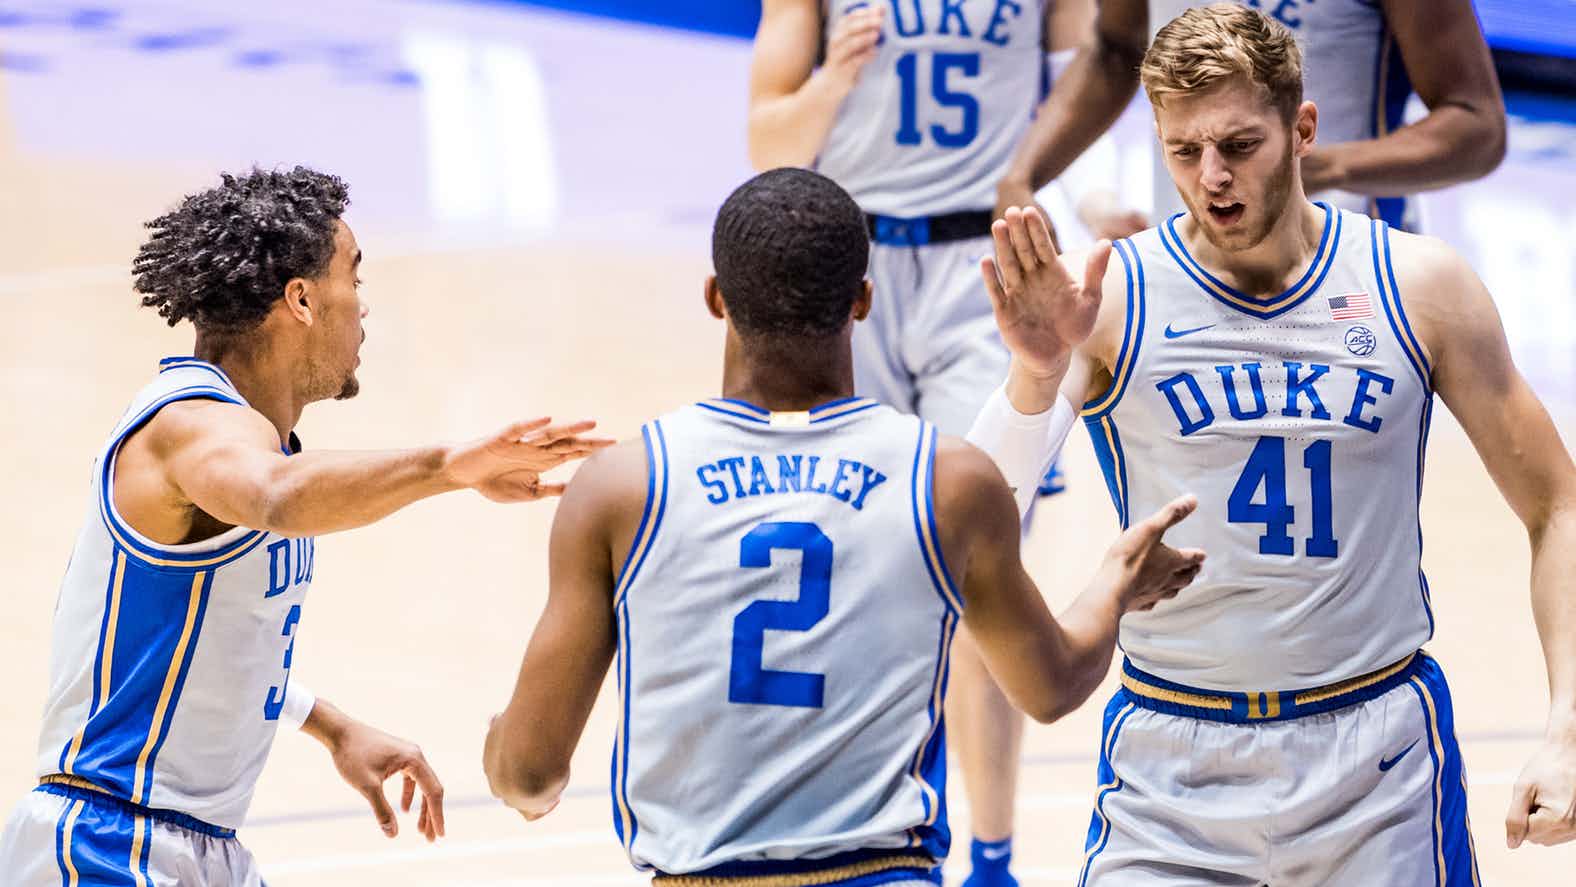 Quotes & Notes from Duke vs Georgia State